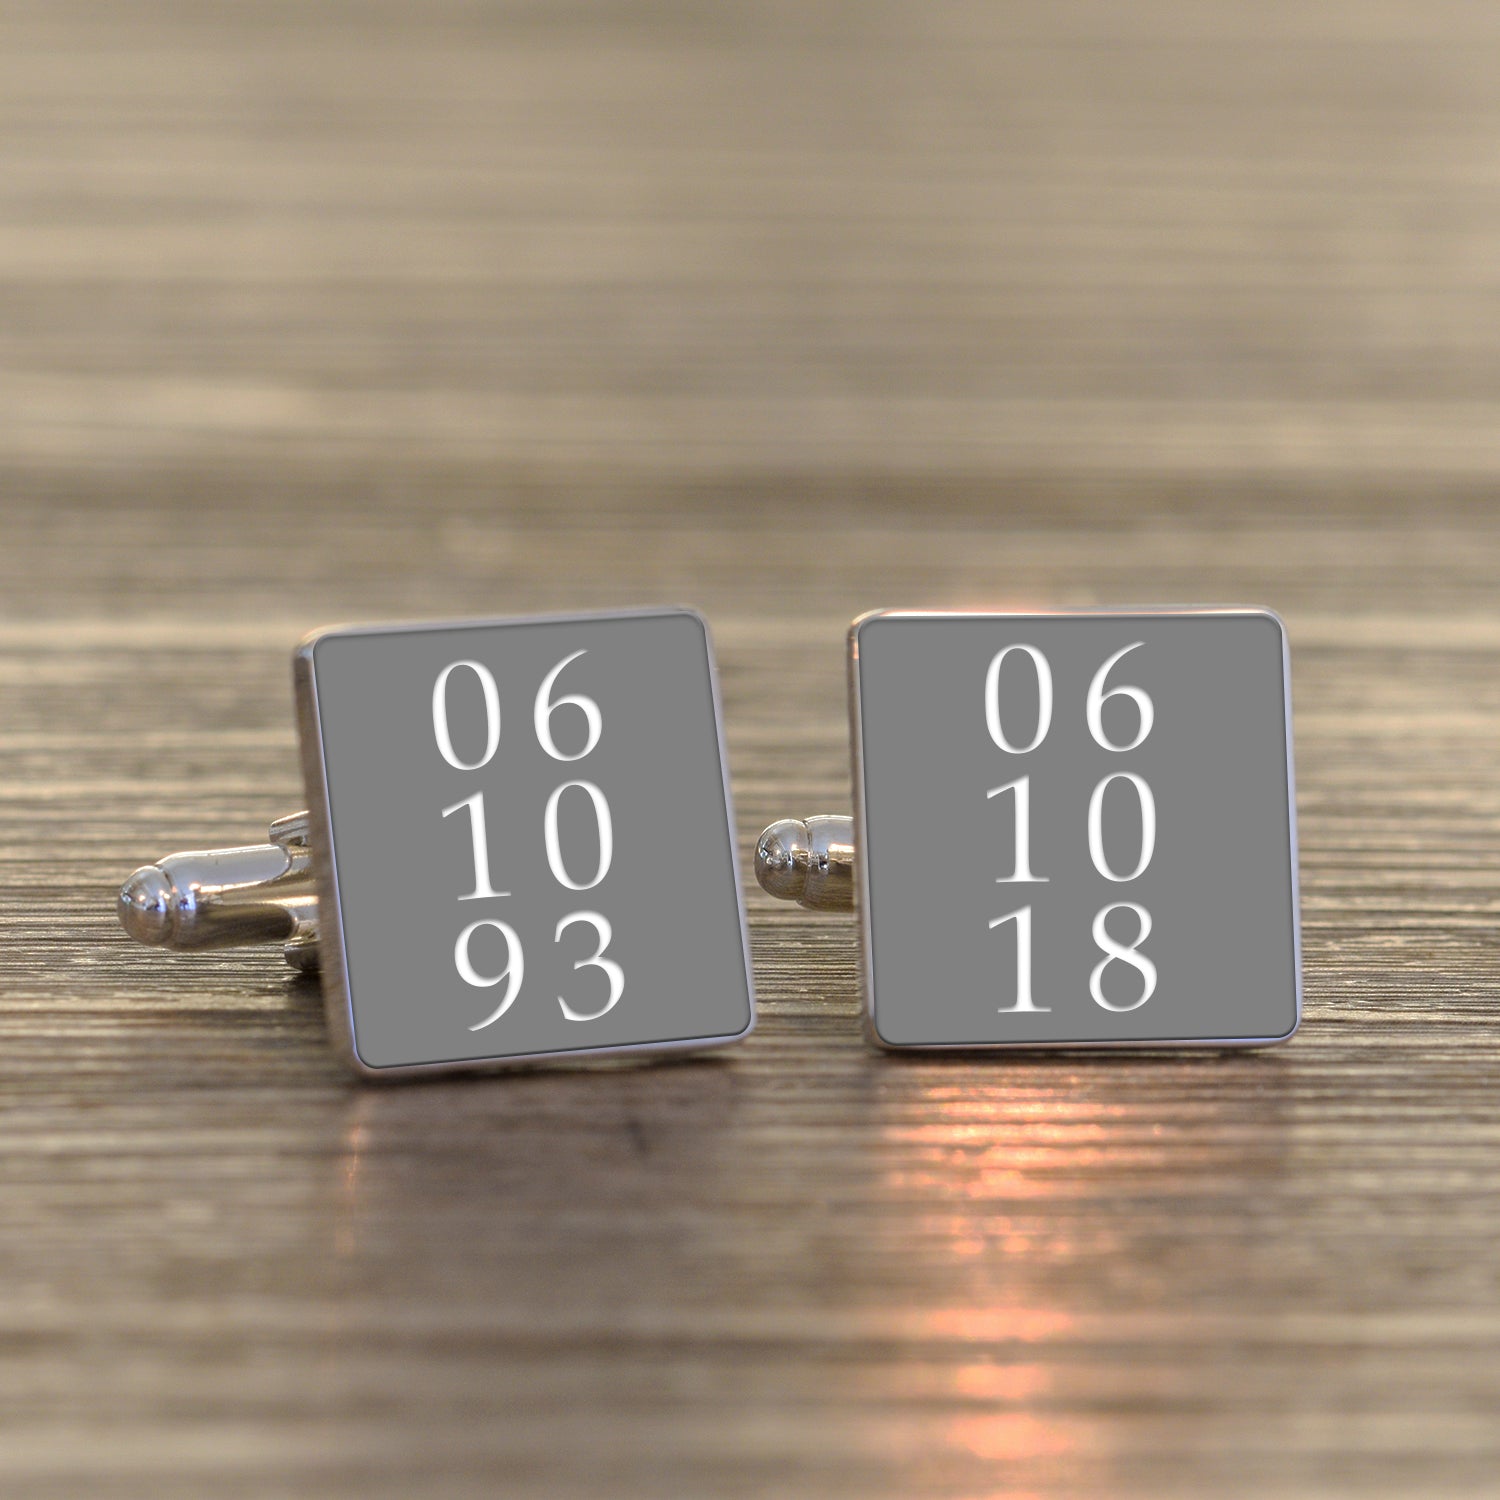 Personalised Special Date/s Cufflinks - PCS Cufflinks & Gifts